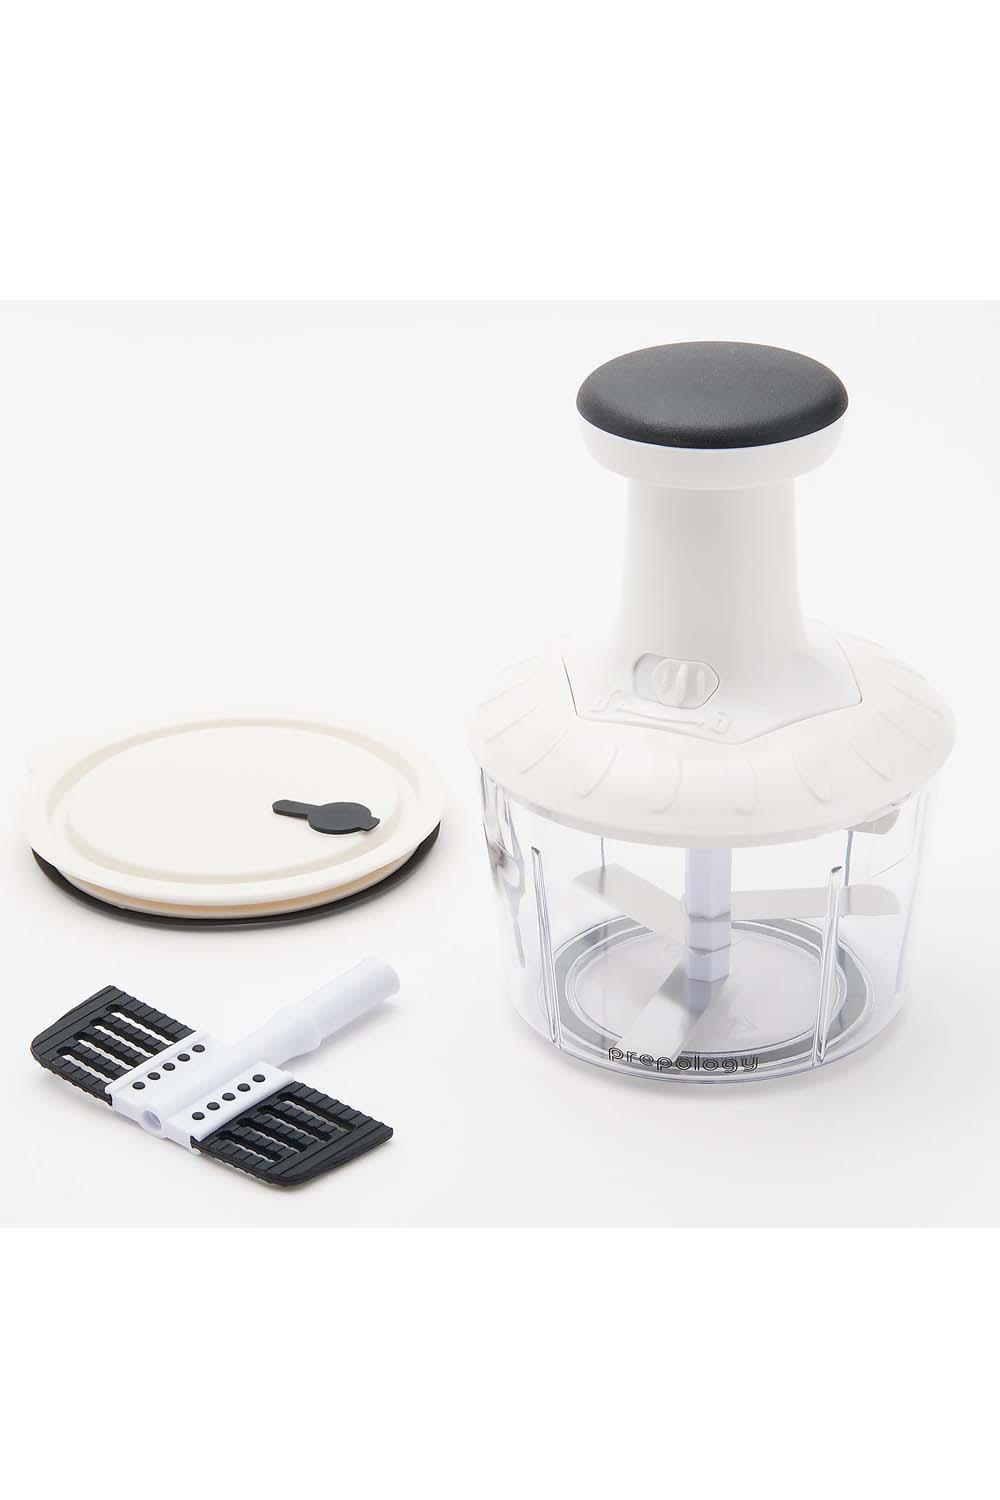 Prepology Rechargeable Mini Chopper w/ Extra Cups